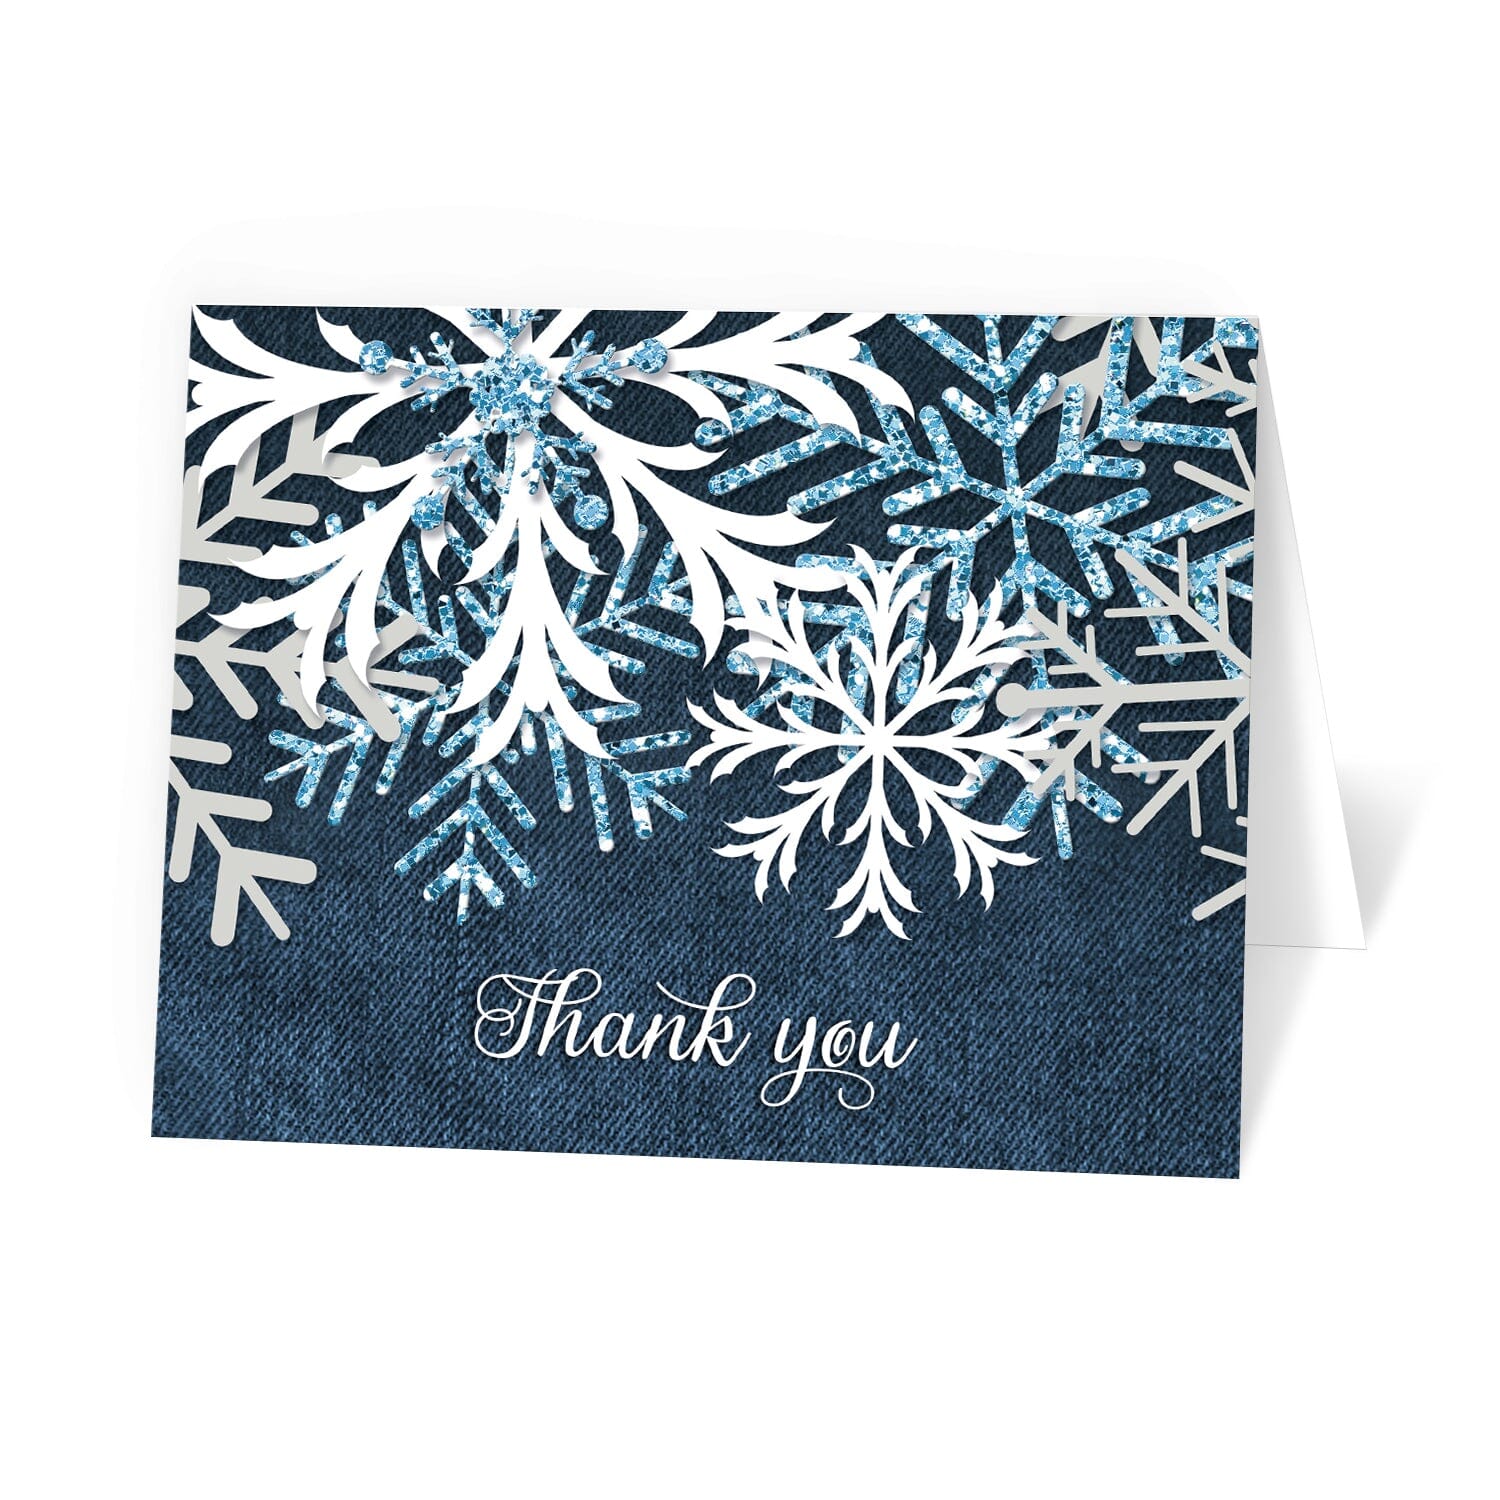 Rustic Snowflake Navy Denim Thank You Cards at Artistically Invited.